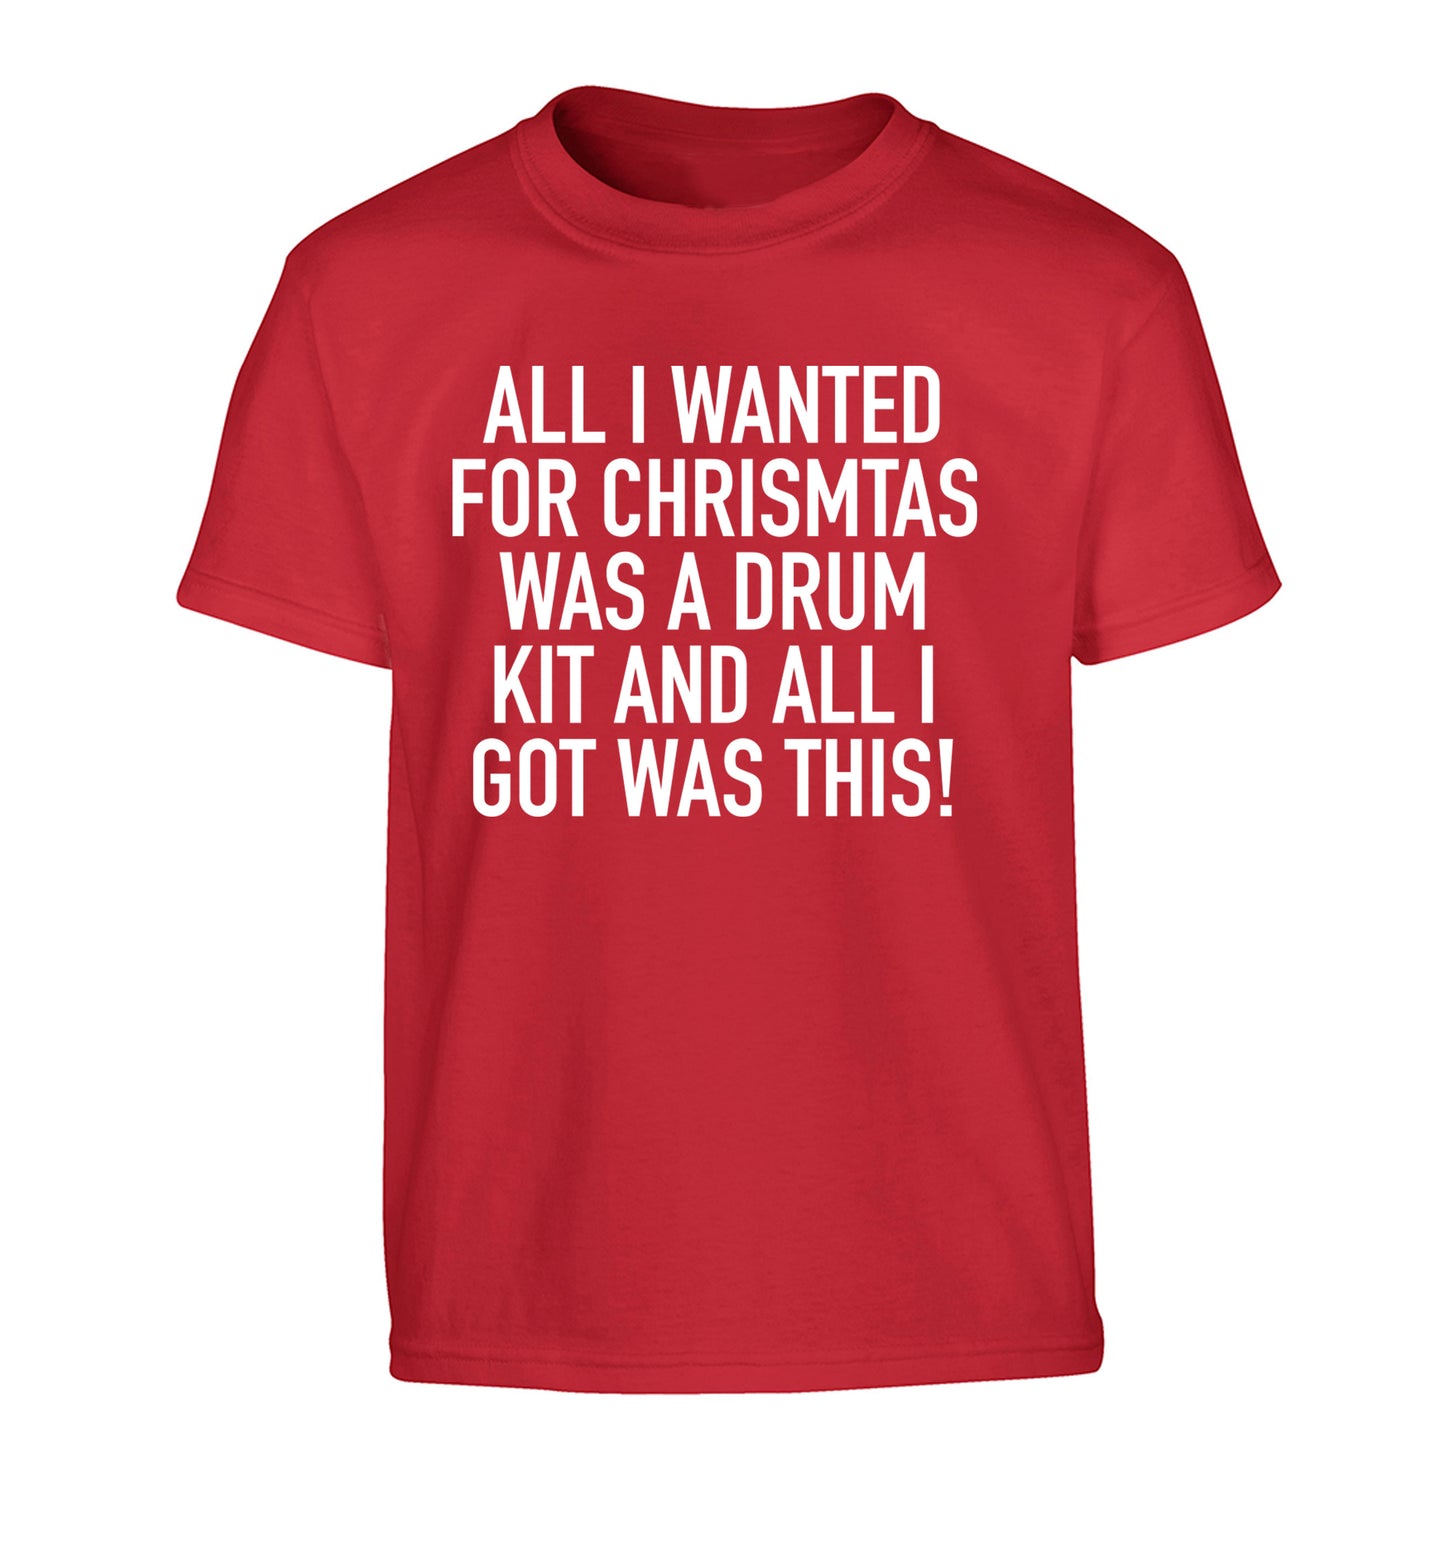 All I wanted for Christmas was a drum kit and all I got was this! Children's red Tshirt 12-14 Years